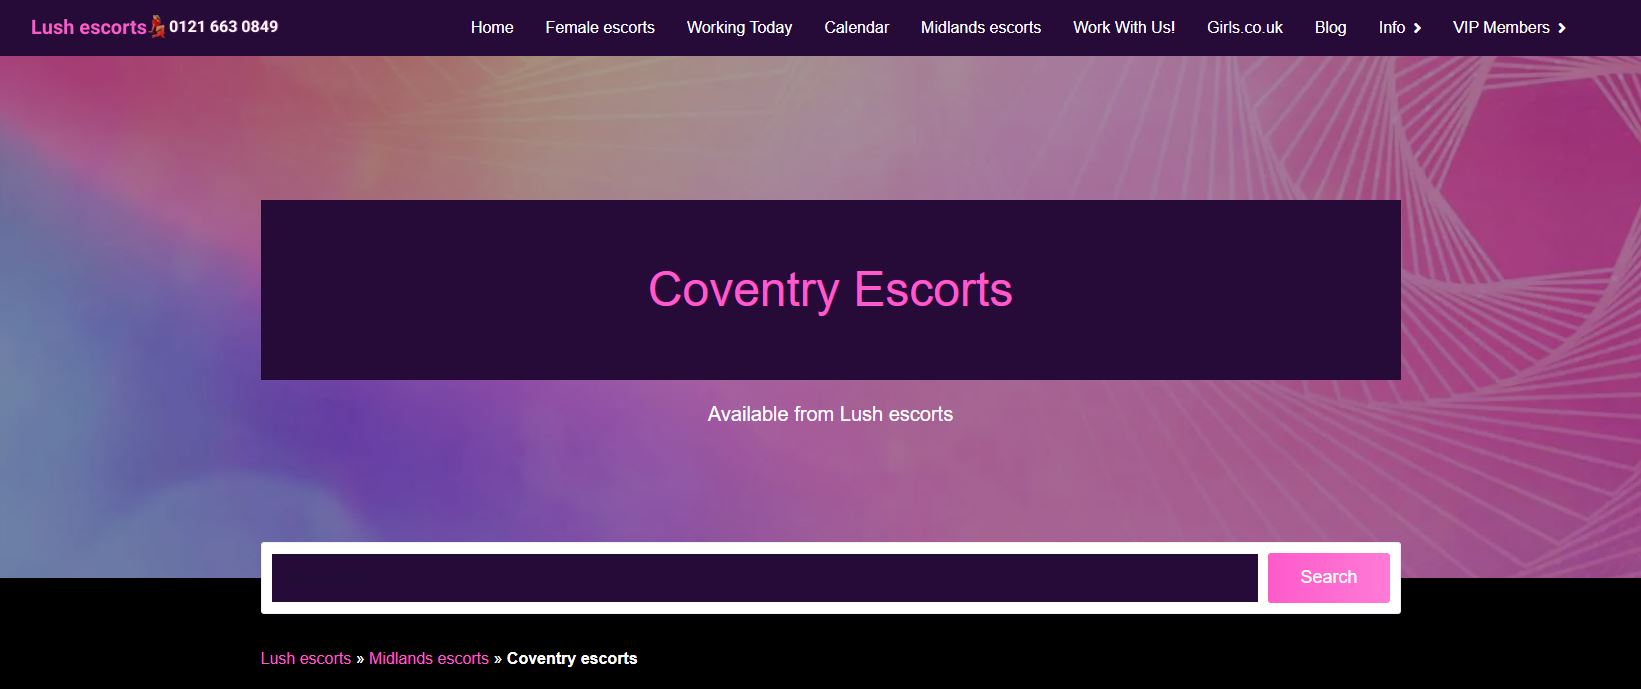 What To Expect When Booking An Escort Through An Agency In Coventry